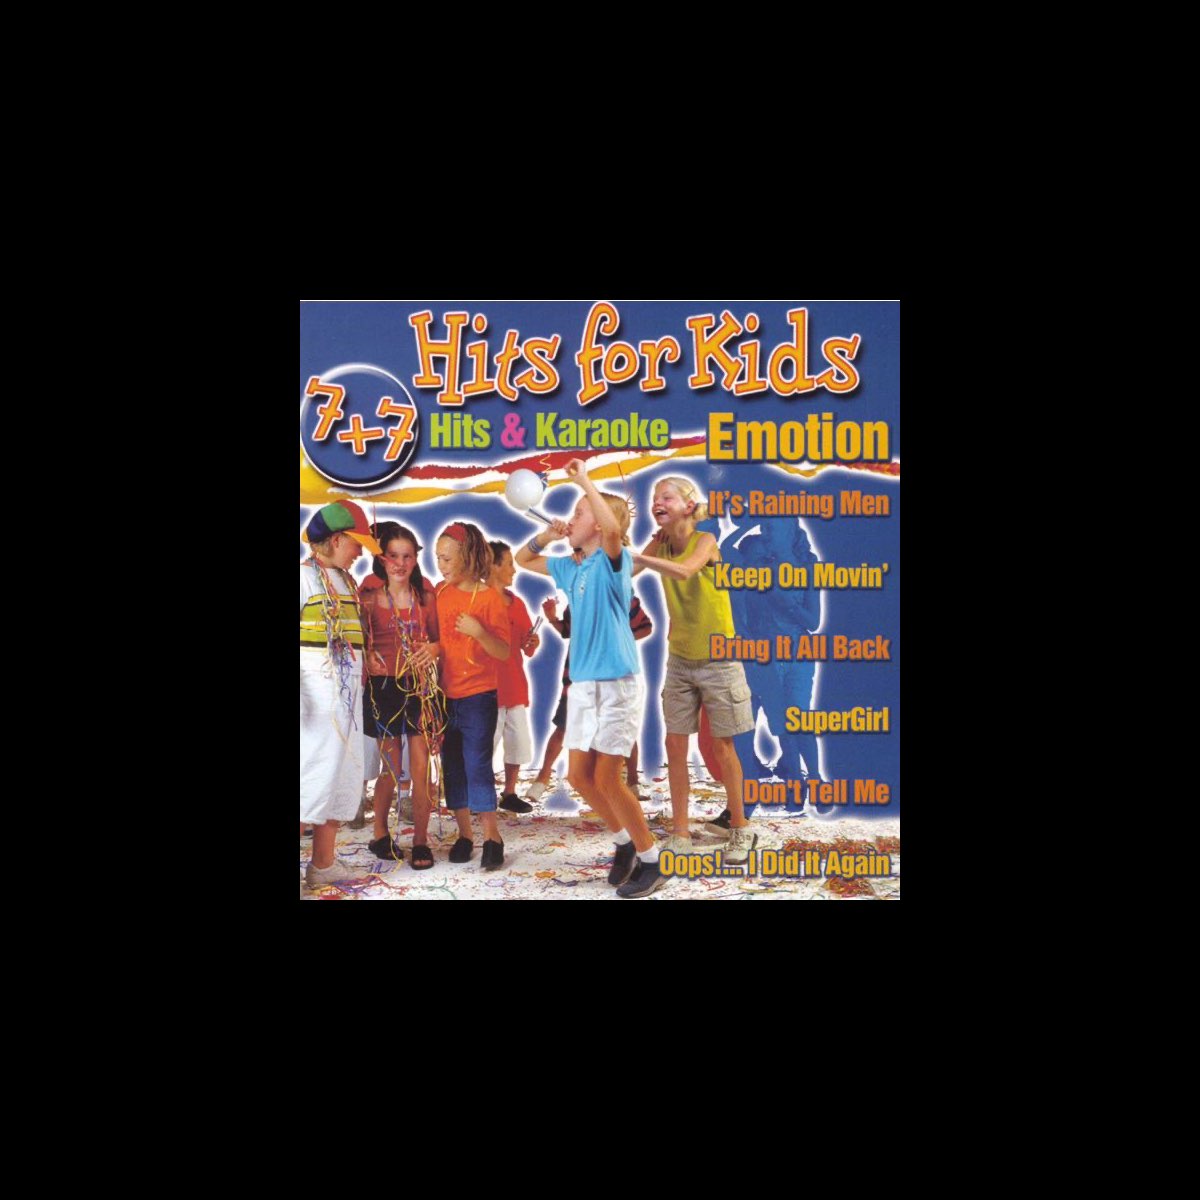 ‎Hits For Kids, Vol.1 (Hits &amp; Karaoke) by Various Artists on Apple Music